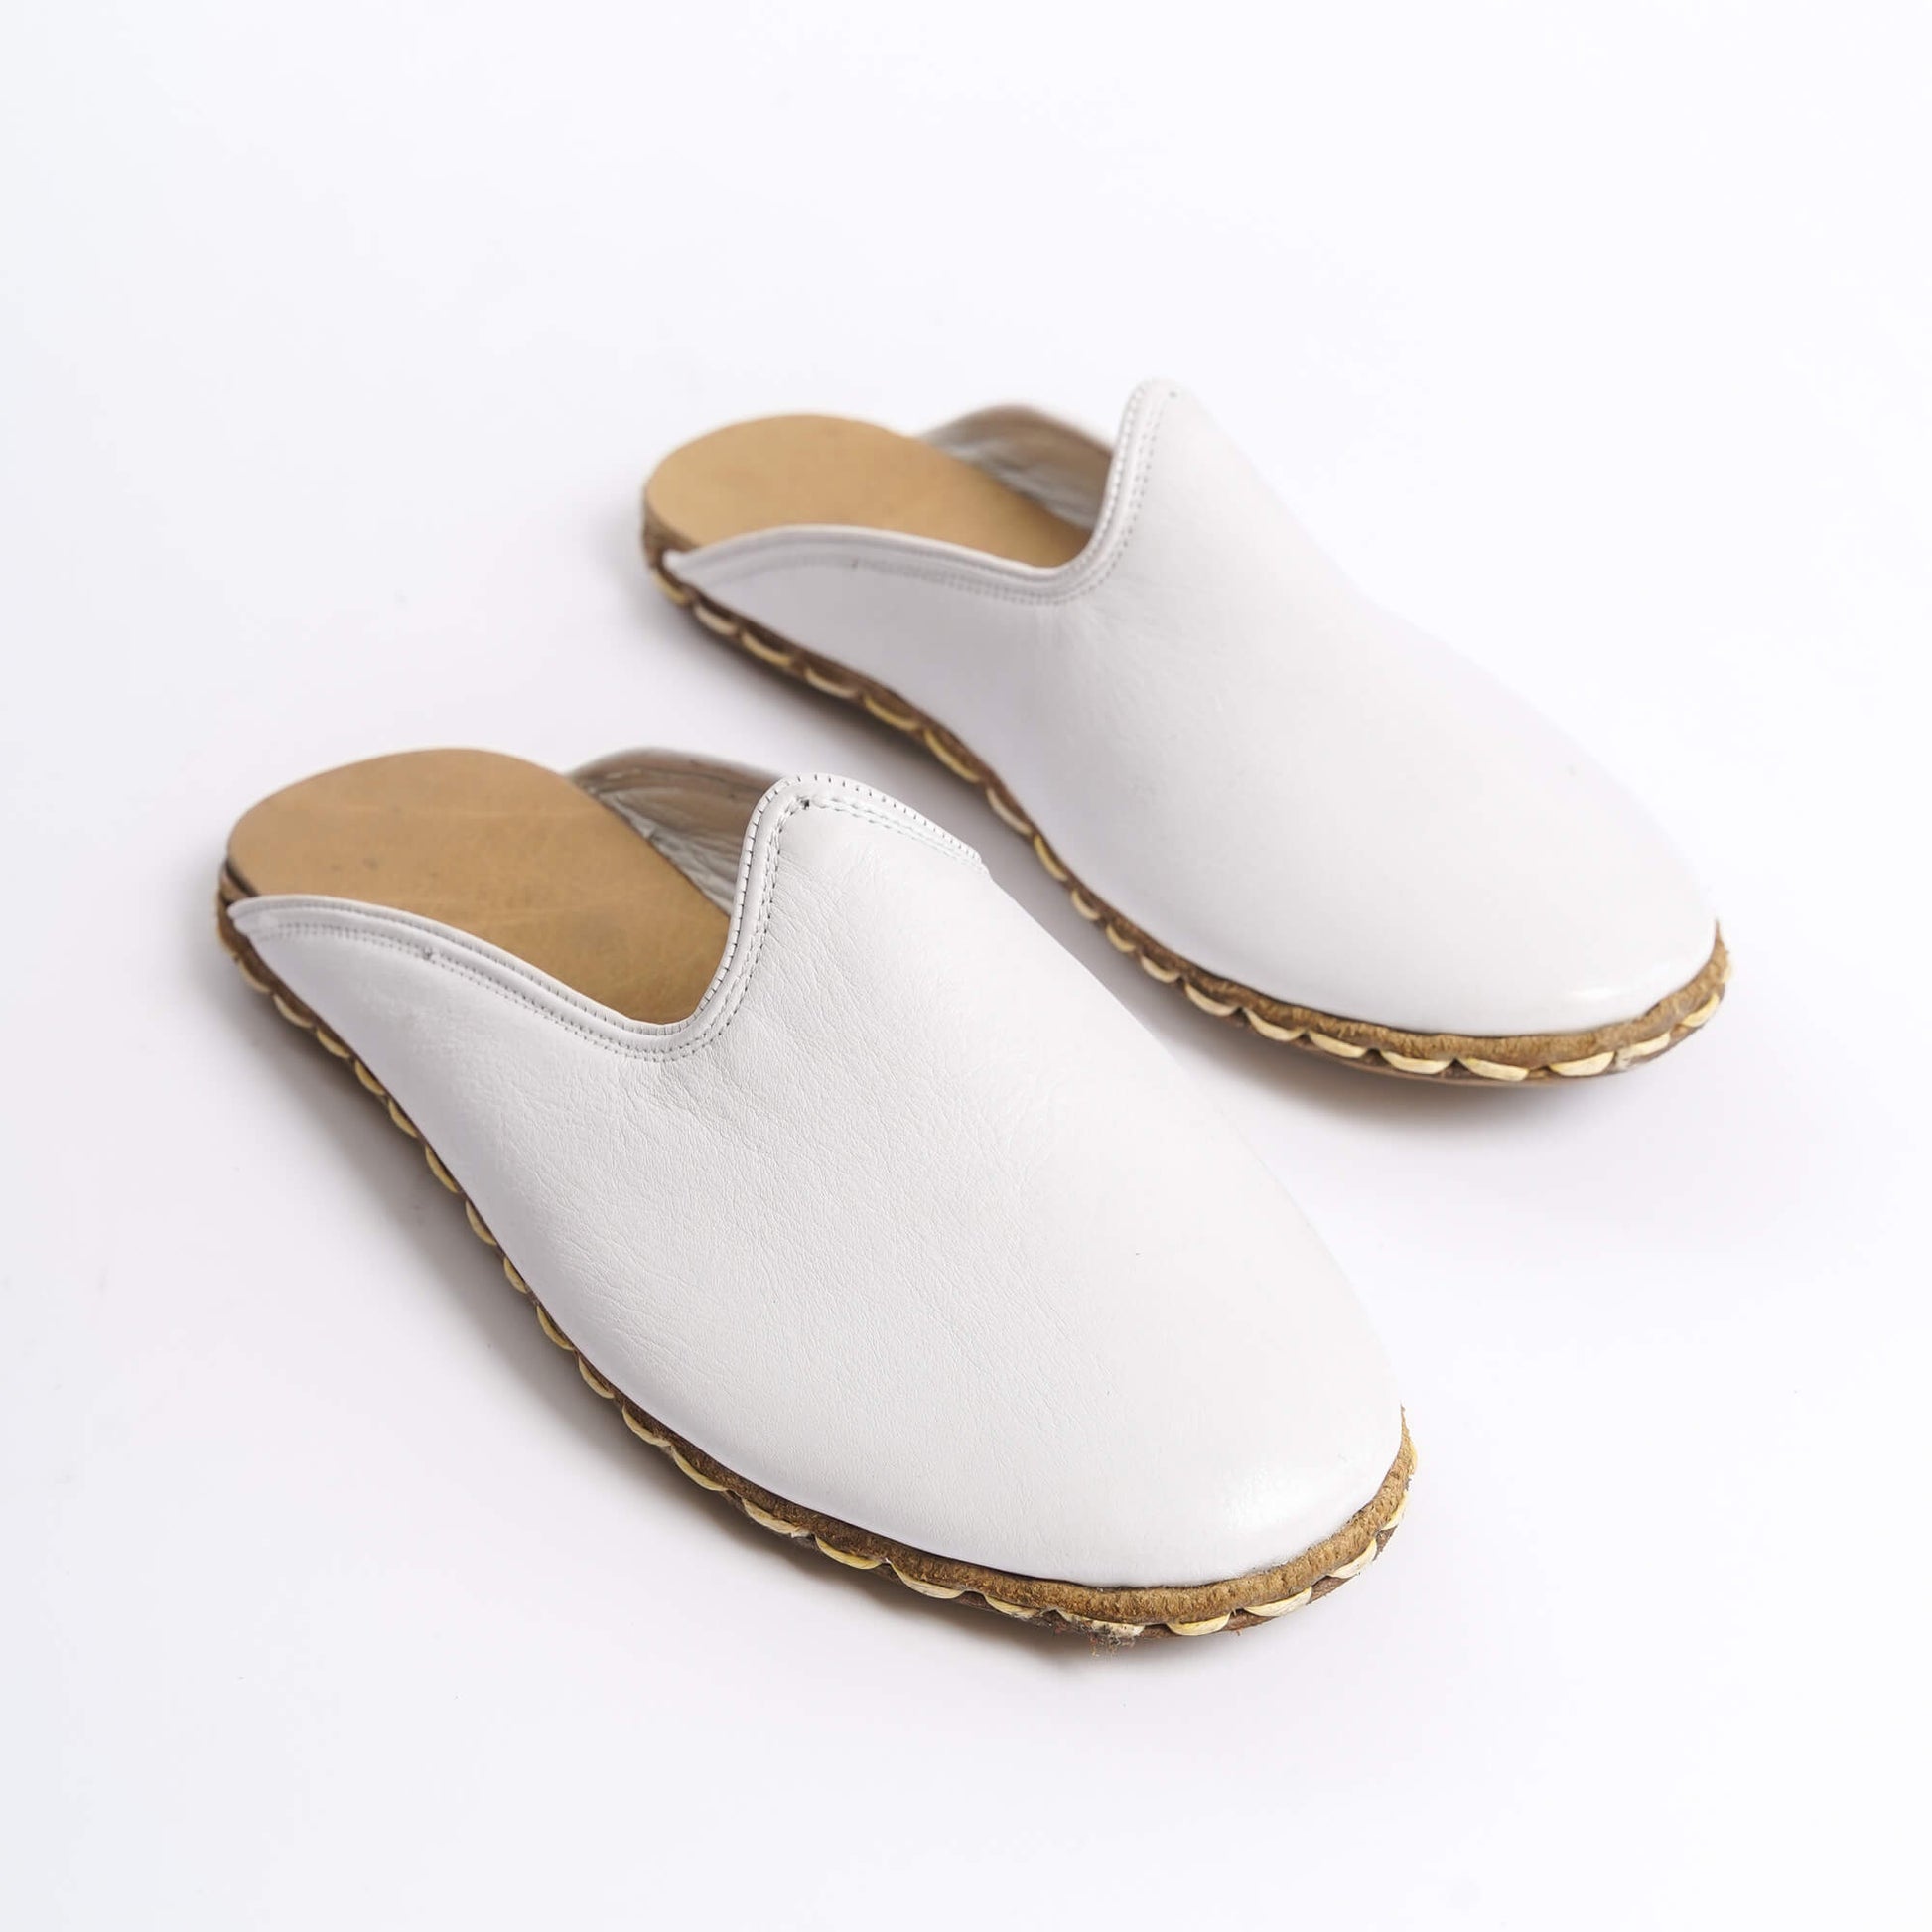 Luxury White Leather Mules for Women – Elegant Summer Shoes with Stitched Leather Sole